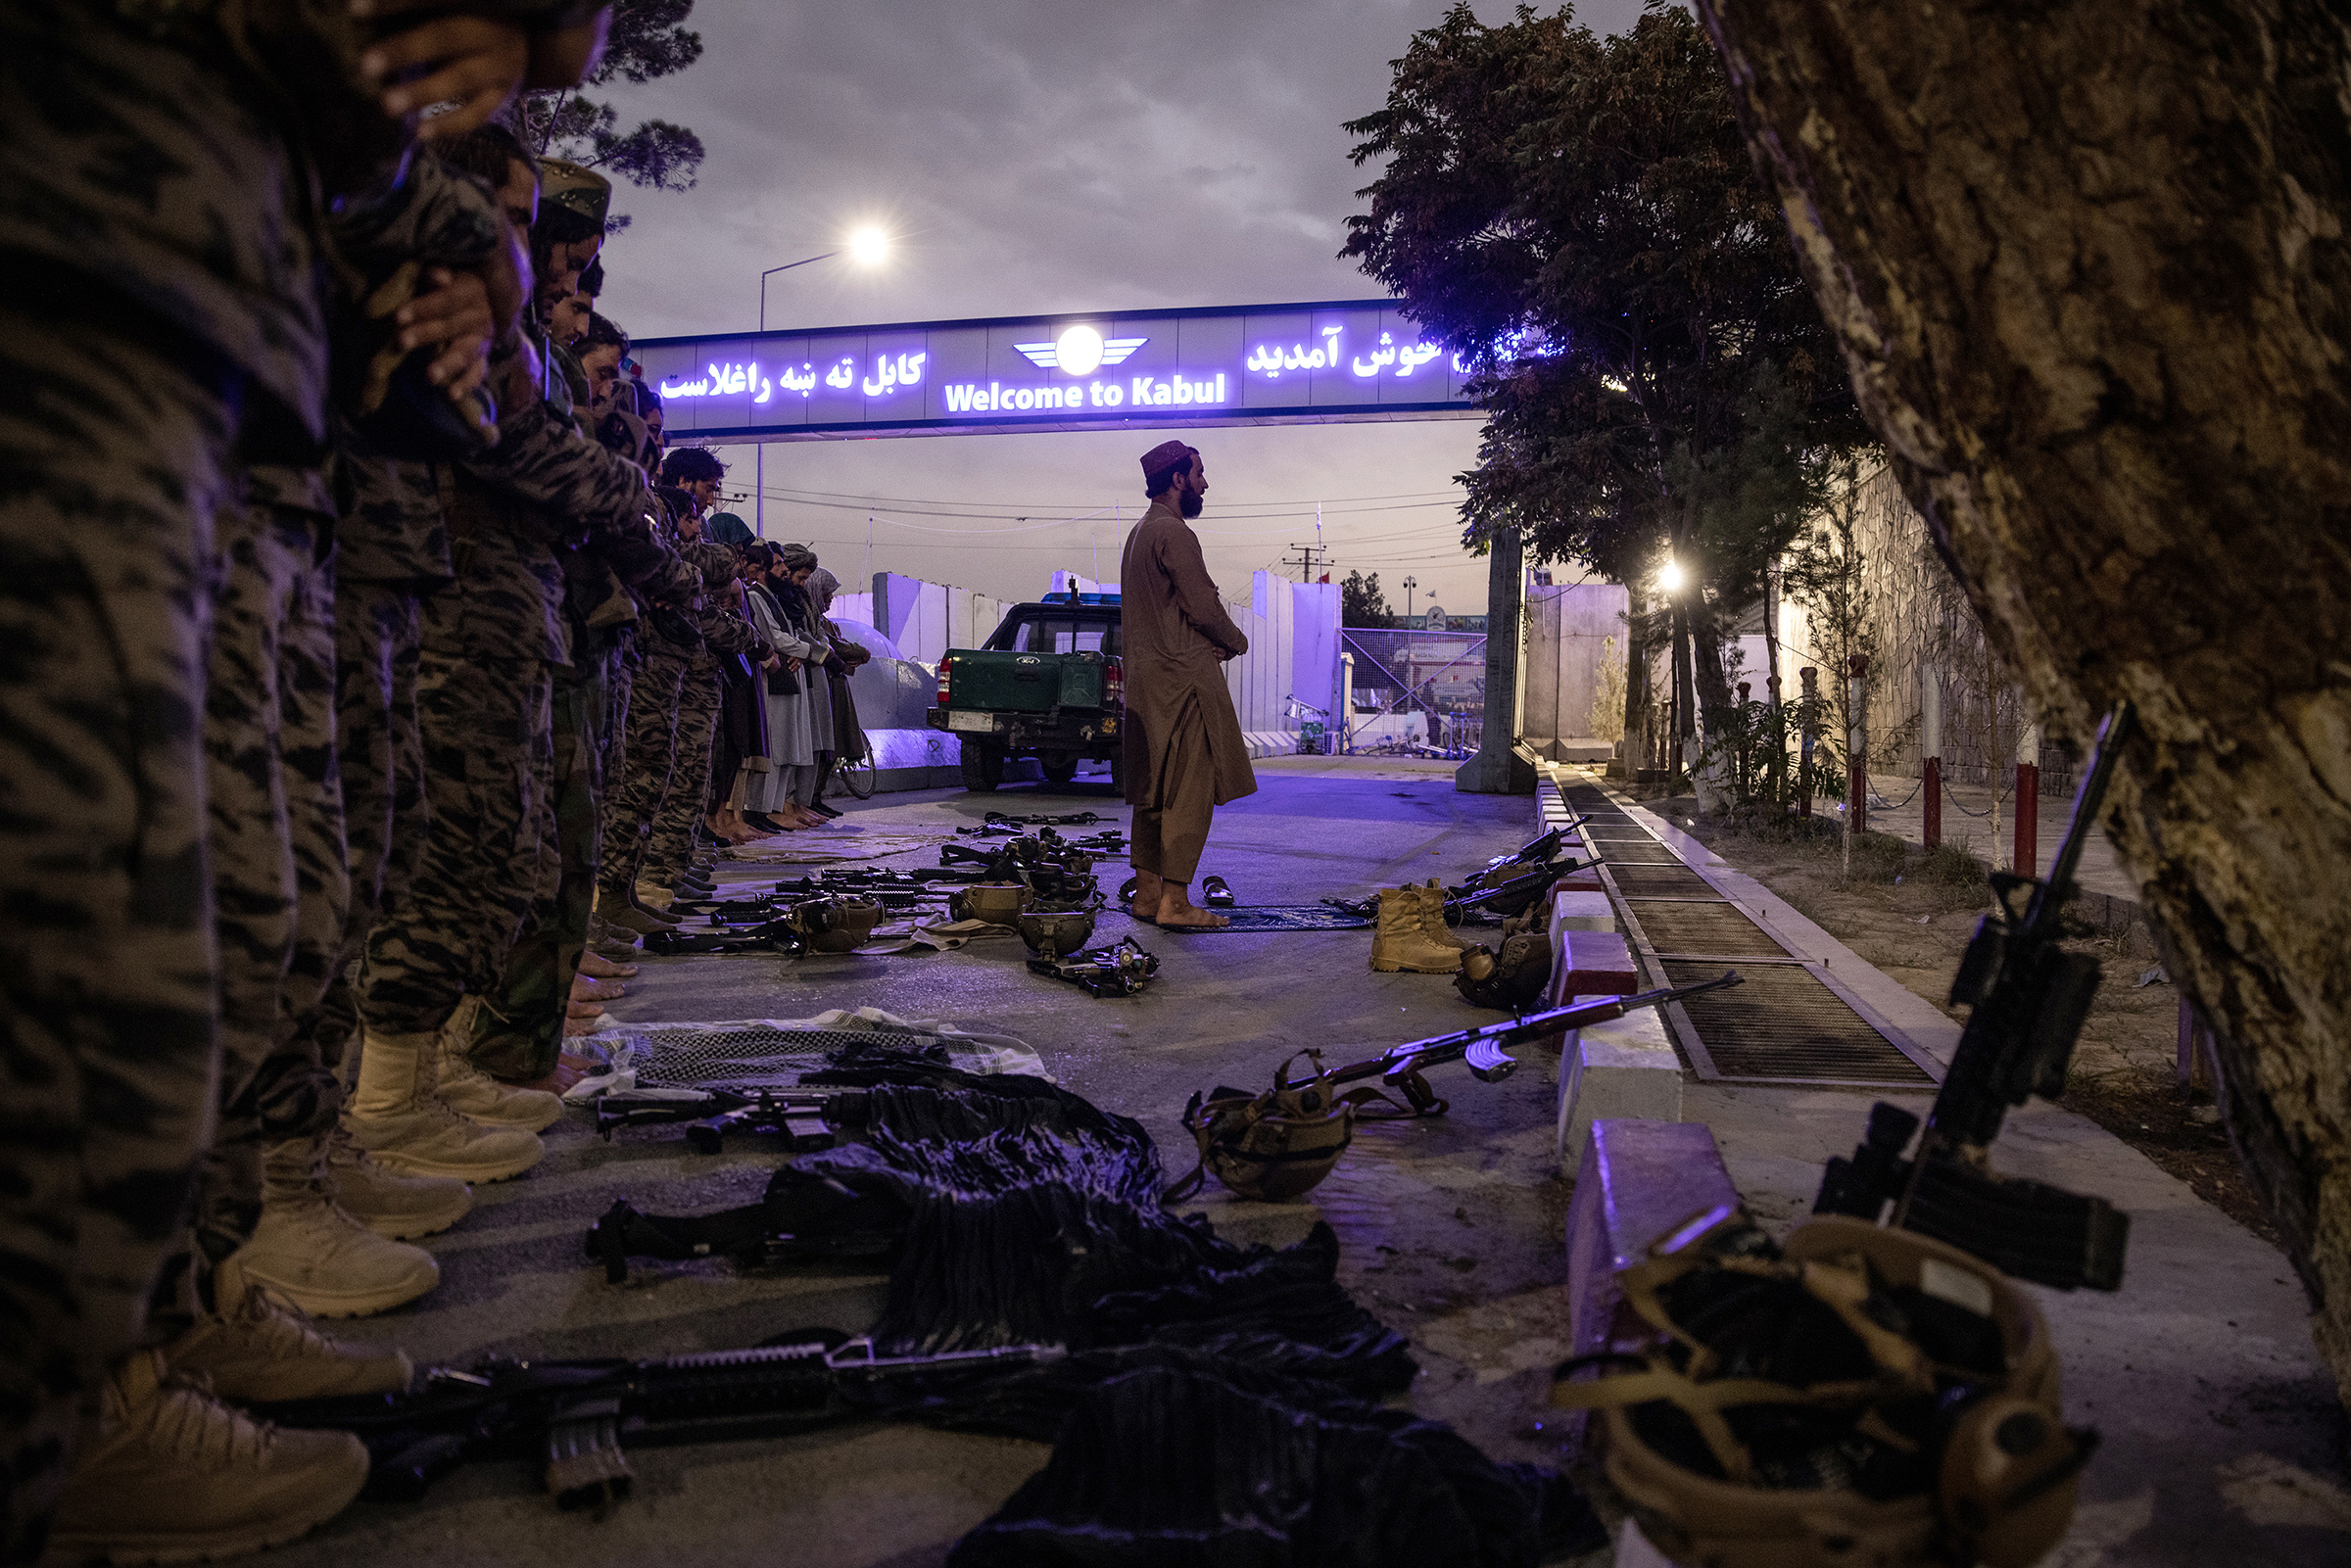 Members of the Badri 313 Battalion, a group of Taliban fighters, stand during evening prayers near Hamid Karzai International Airport in Kabul on Aug. 28. (Jim Huylebroek—The New York Times/Redux)